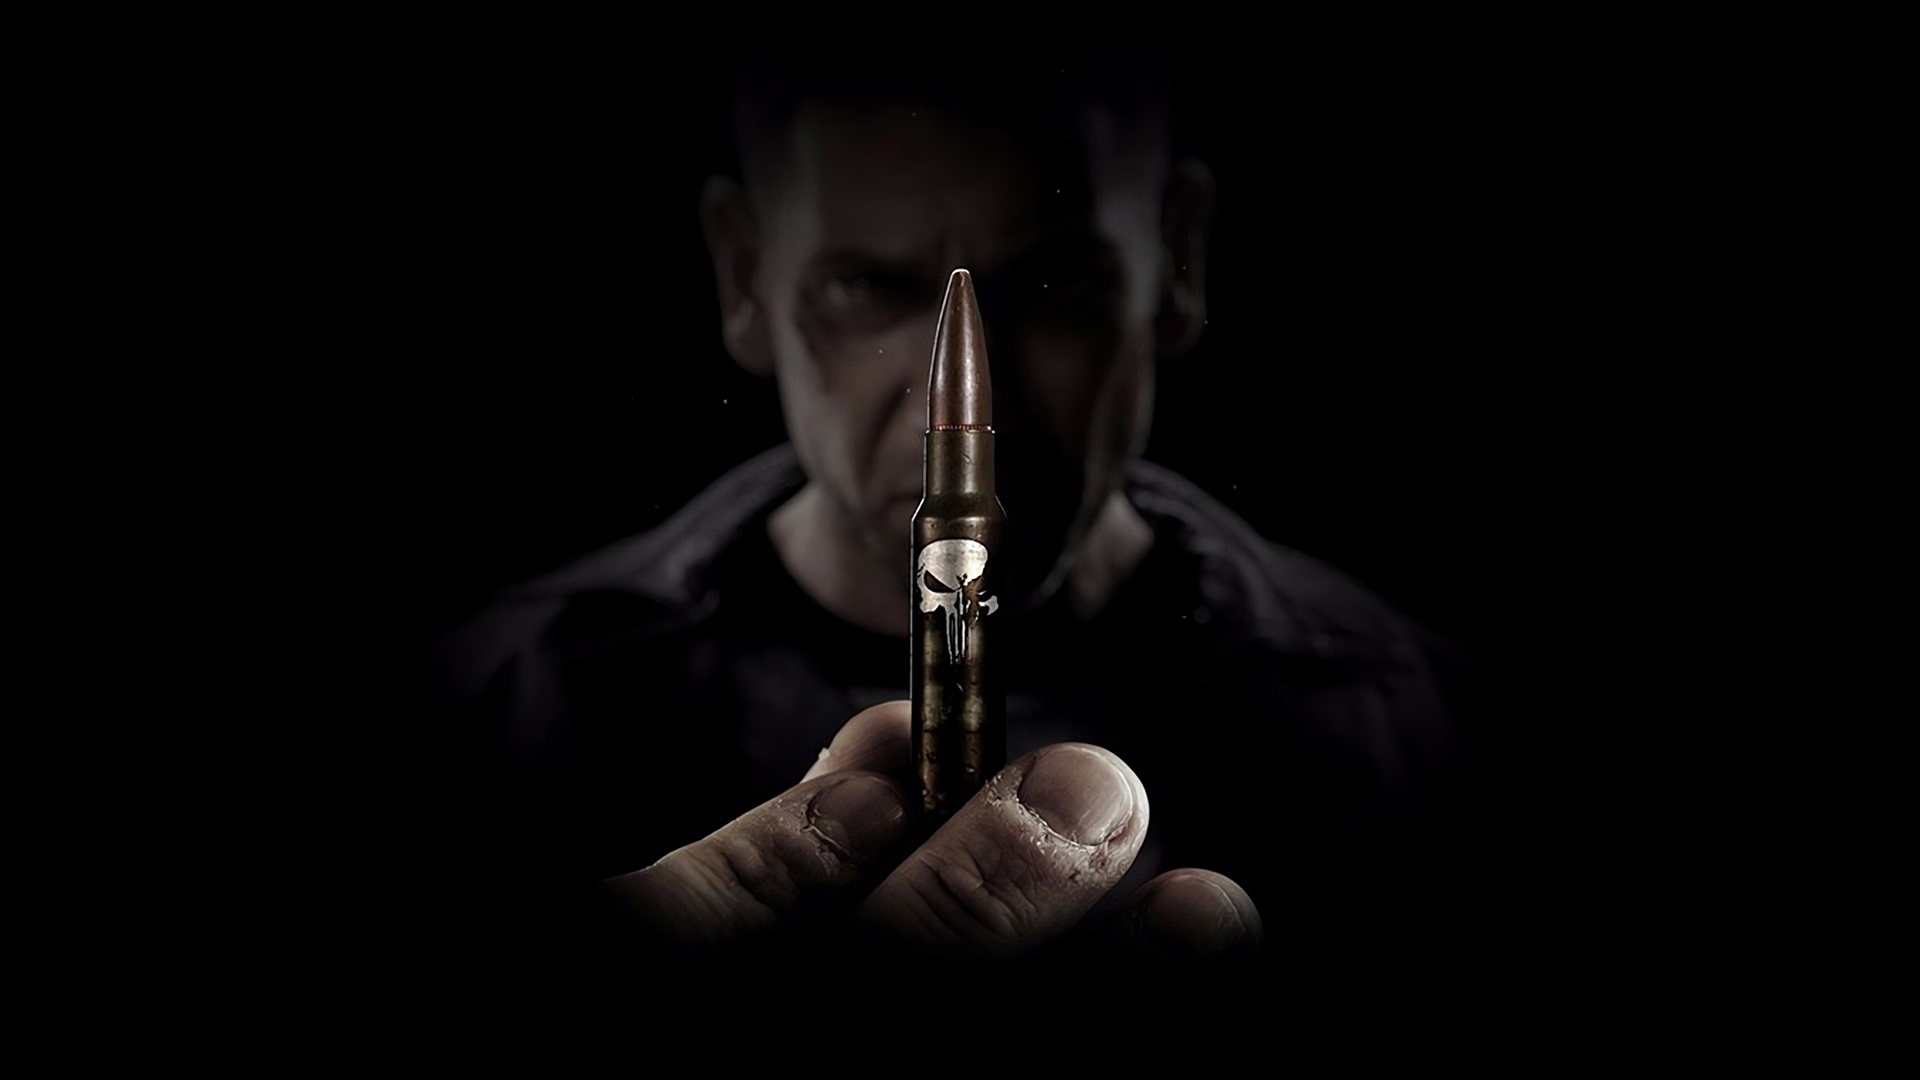 The Punisher [TV Series] Wallpaper HD